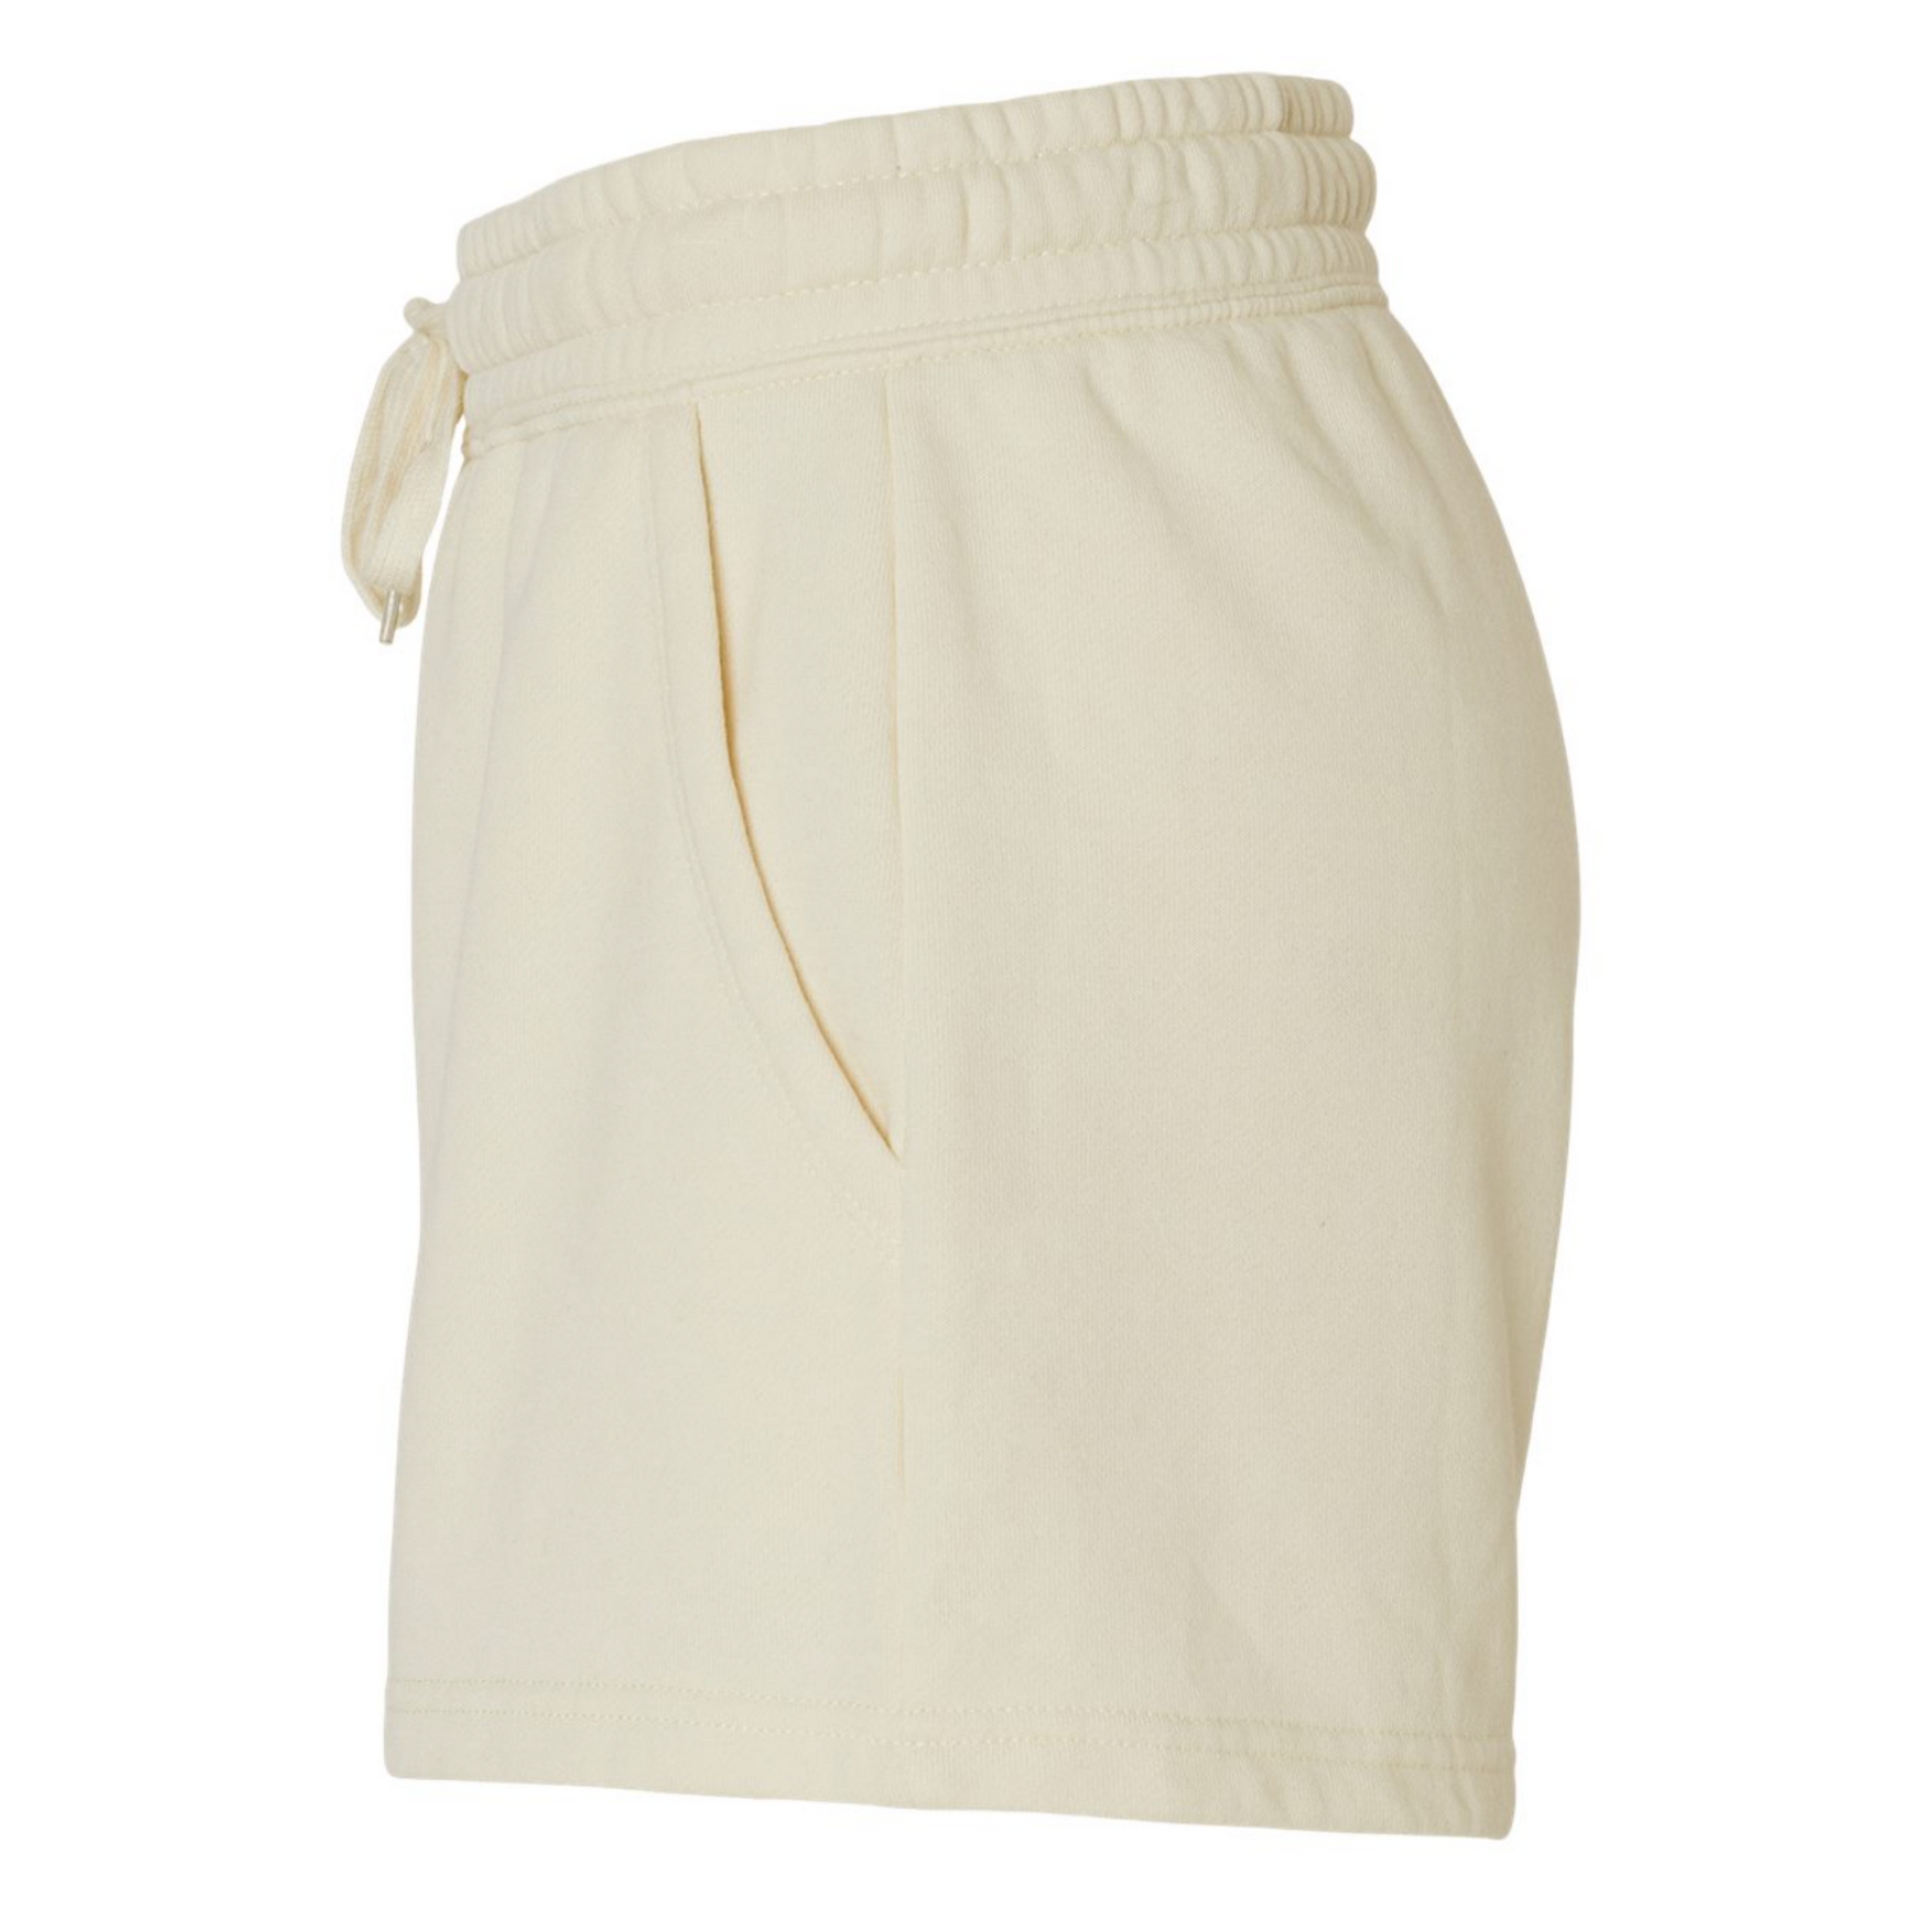 Mama Shorts in cream with a comfy warm fabric. Draw strings loop the front and small emblem of "mama" is on the right hand side of the short in black - on the front. This is the side view of the shorts.